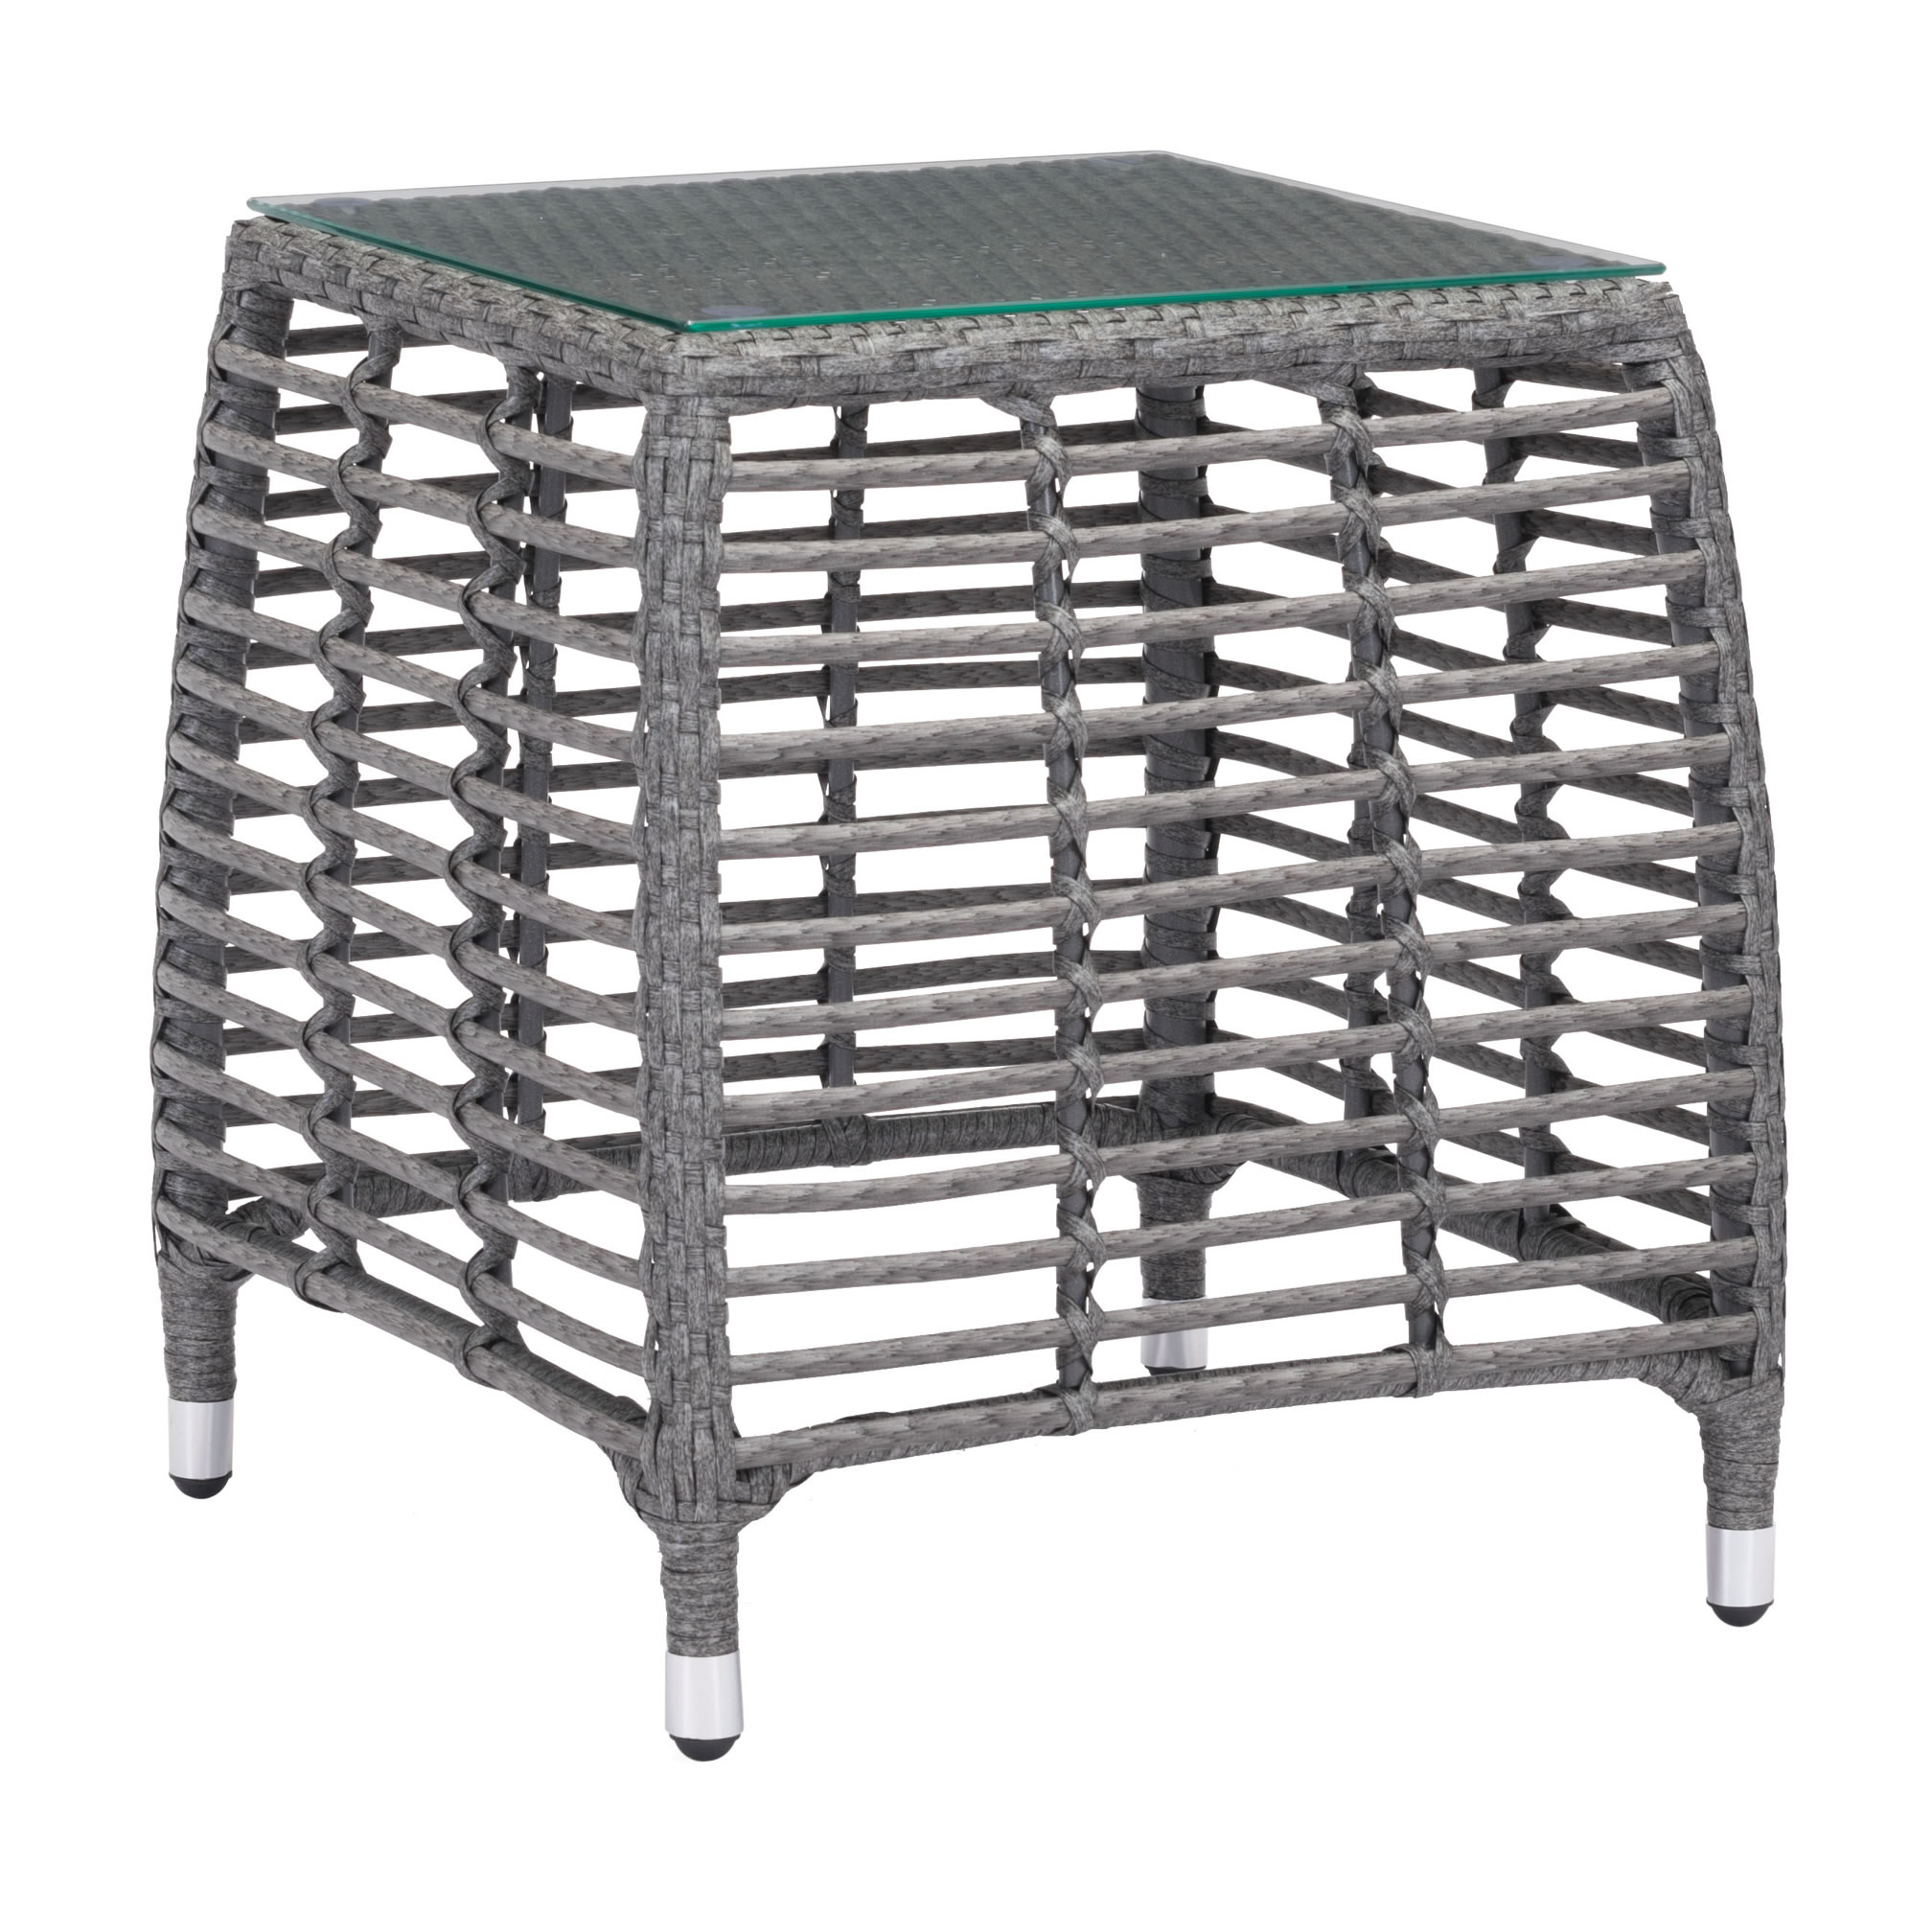 20" x 20" x 22" Gray & Beige, Tempered Glass, Aluminum Frame, Synthetic Weave, Beach Side Table